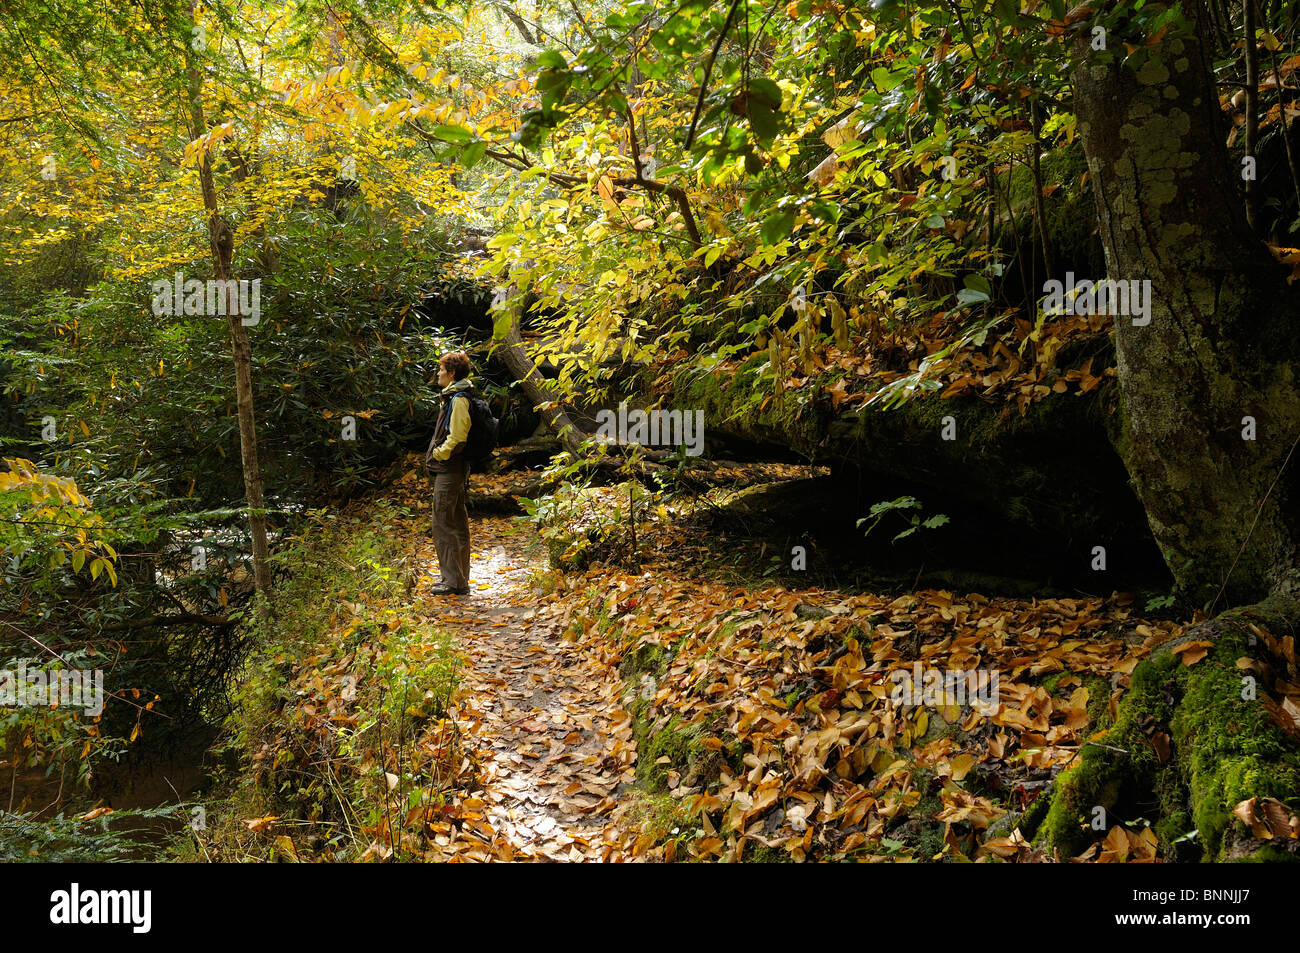 woman Hiker fall autumn leaves trail Rocky Arch Daniel Boone National Forest The Red River Gorge Geological Area Kentucky USA Stock Photo